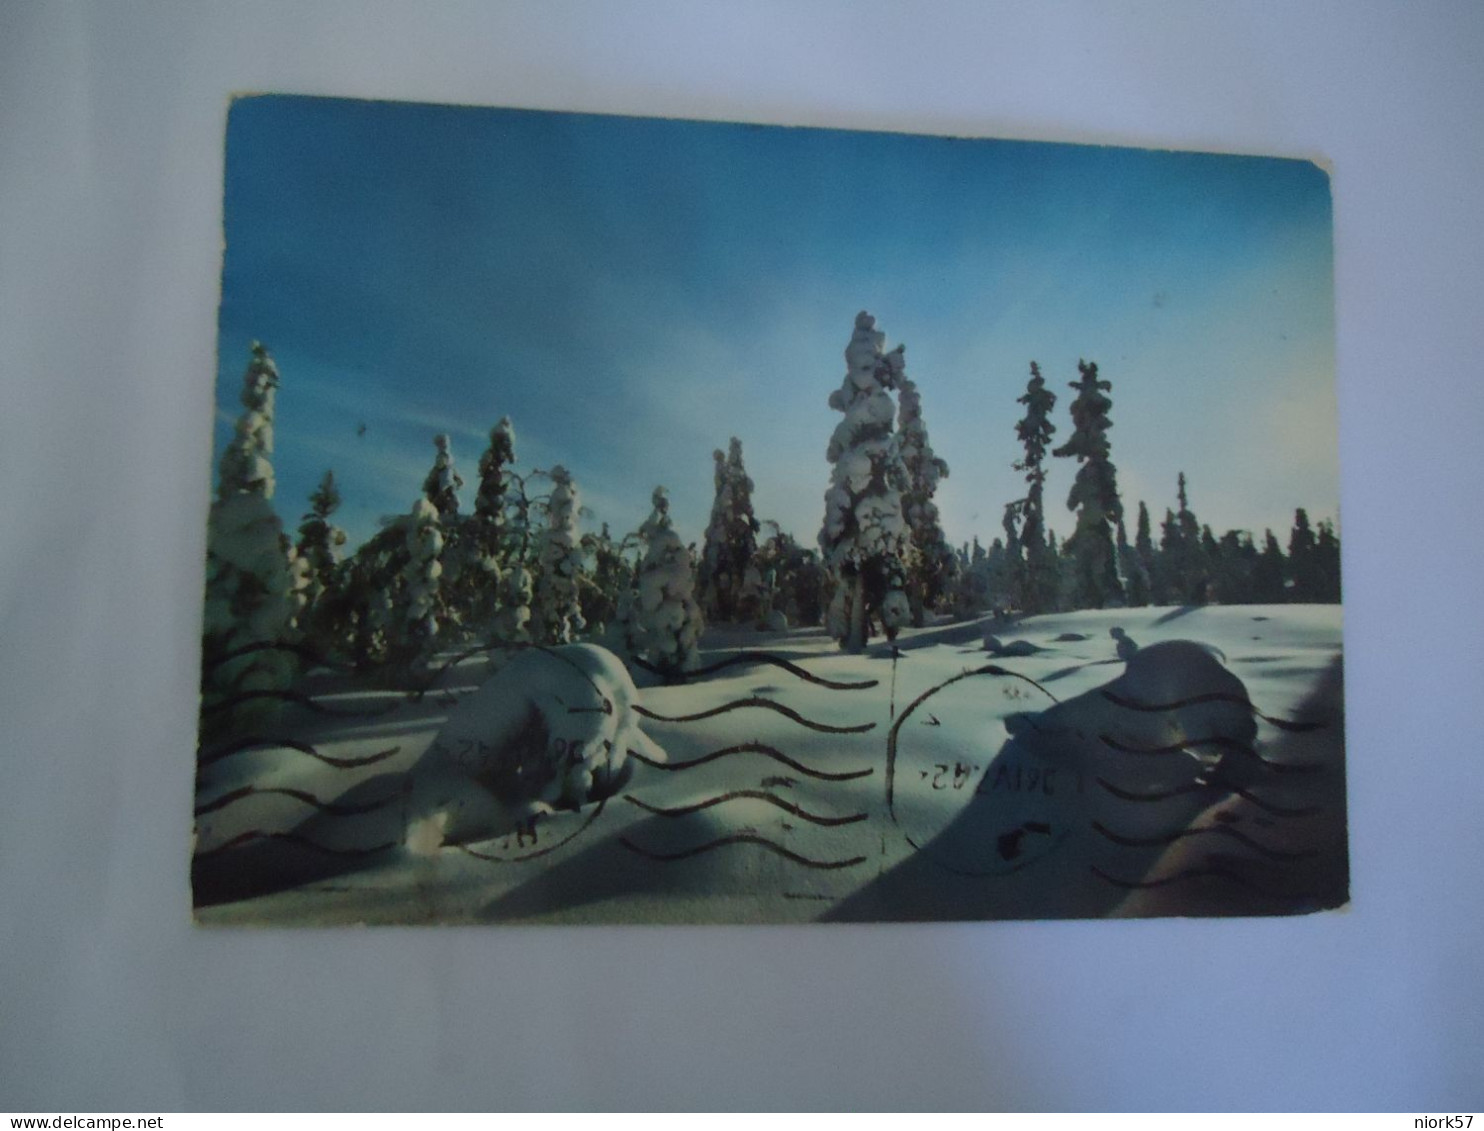 FINLAND   POSTCARDS 1974 KUULTOKUVA    SNOWY FOREST COSTUMES STAMPS     MORE  PURHASES 10% DISCOUNT - Finland